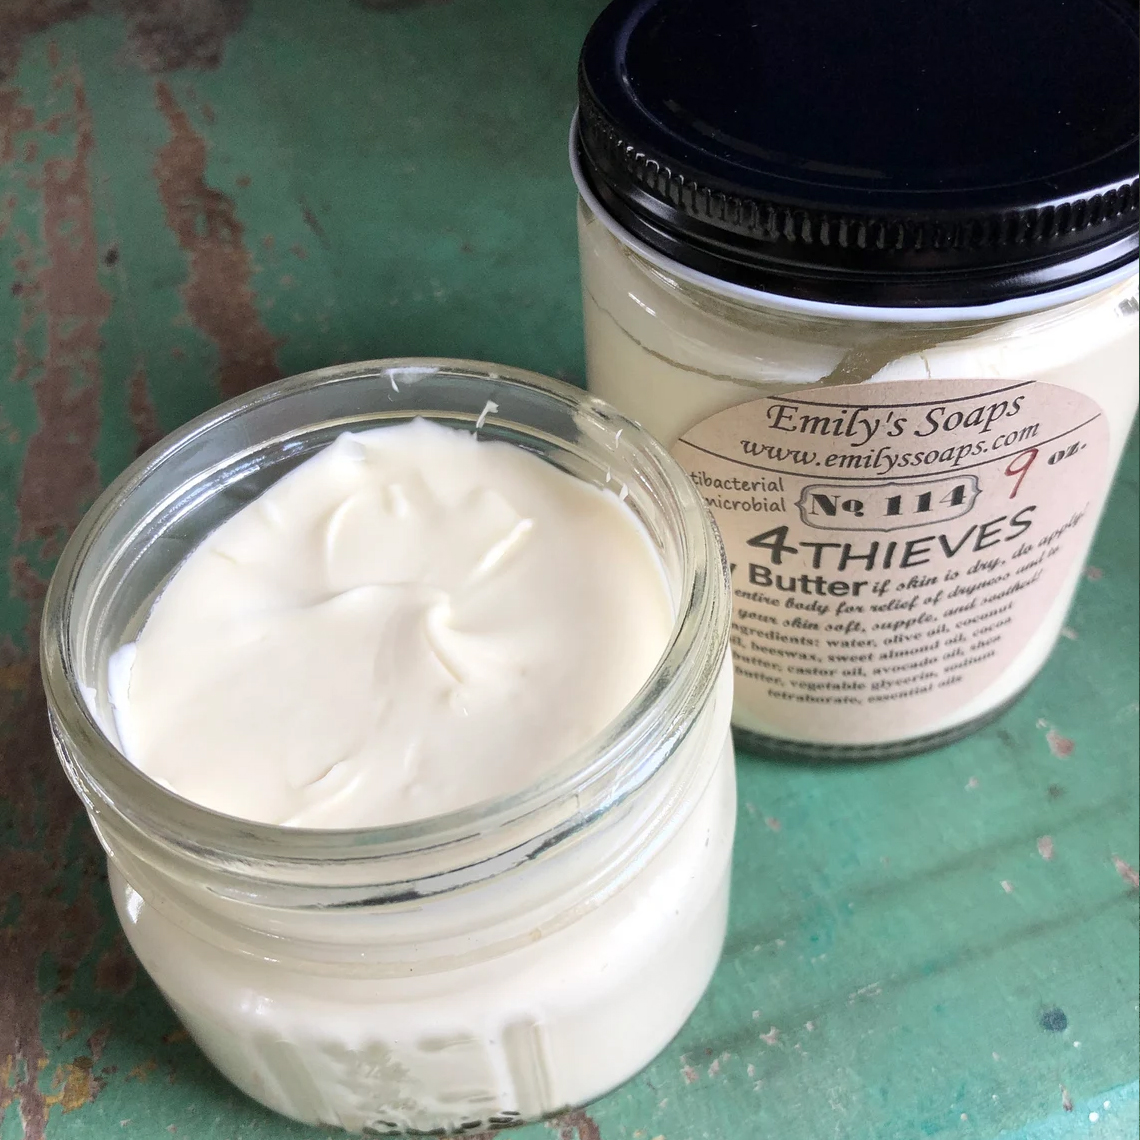 Emilys Soaps Body Butter Thieves